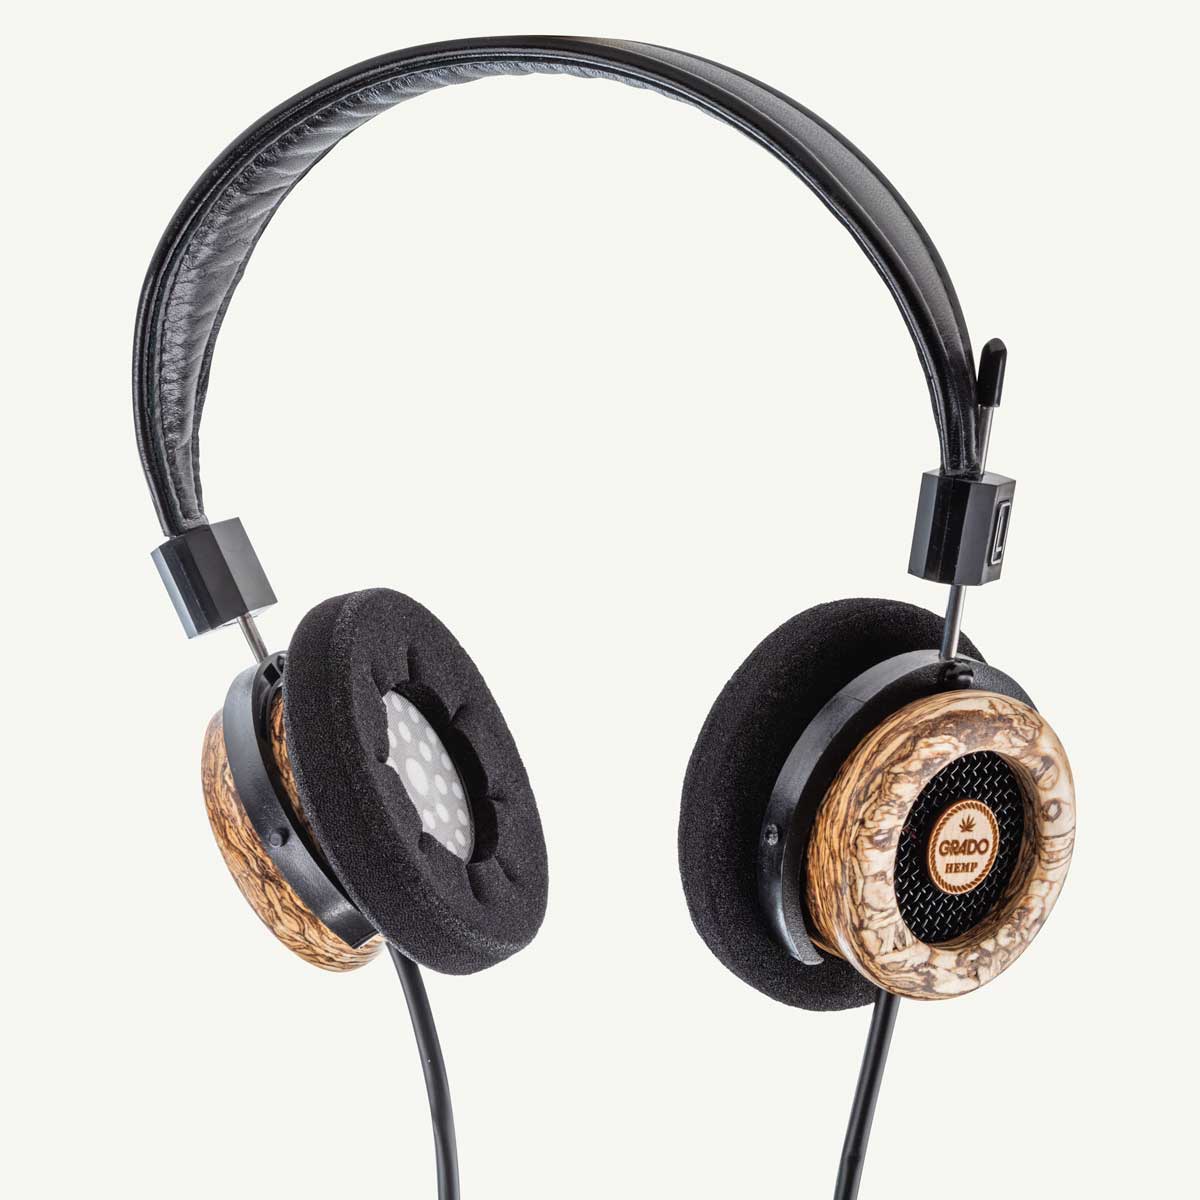 3/4 view photo of the Hemp Headphones on a transparent background